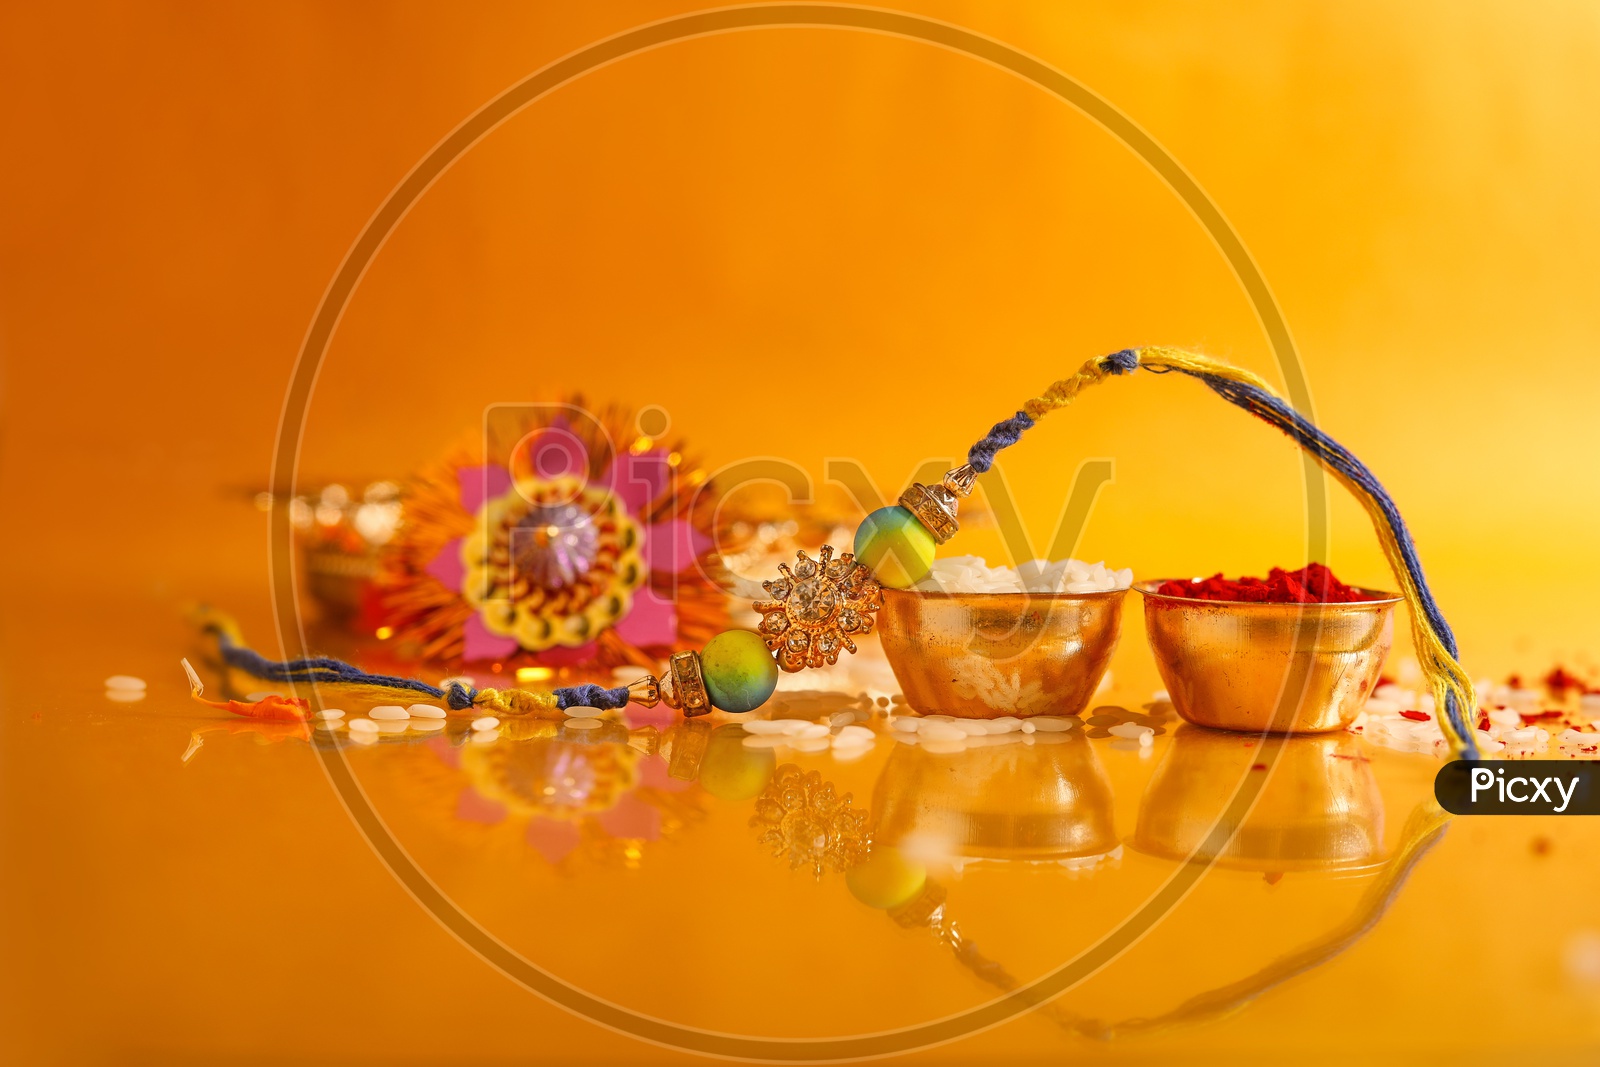 Rakhi with Kumkum & rice -  Indian Festival traditions/rituals